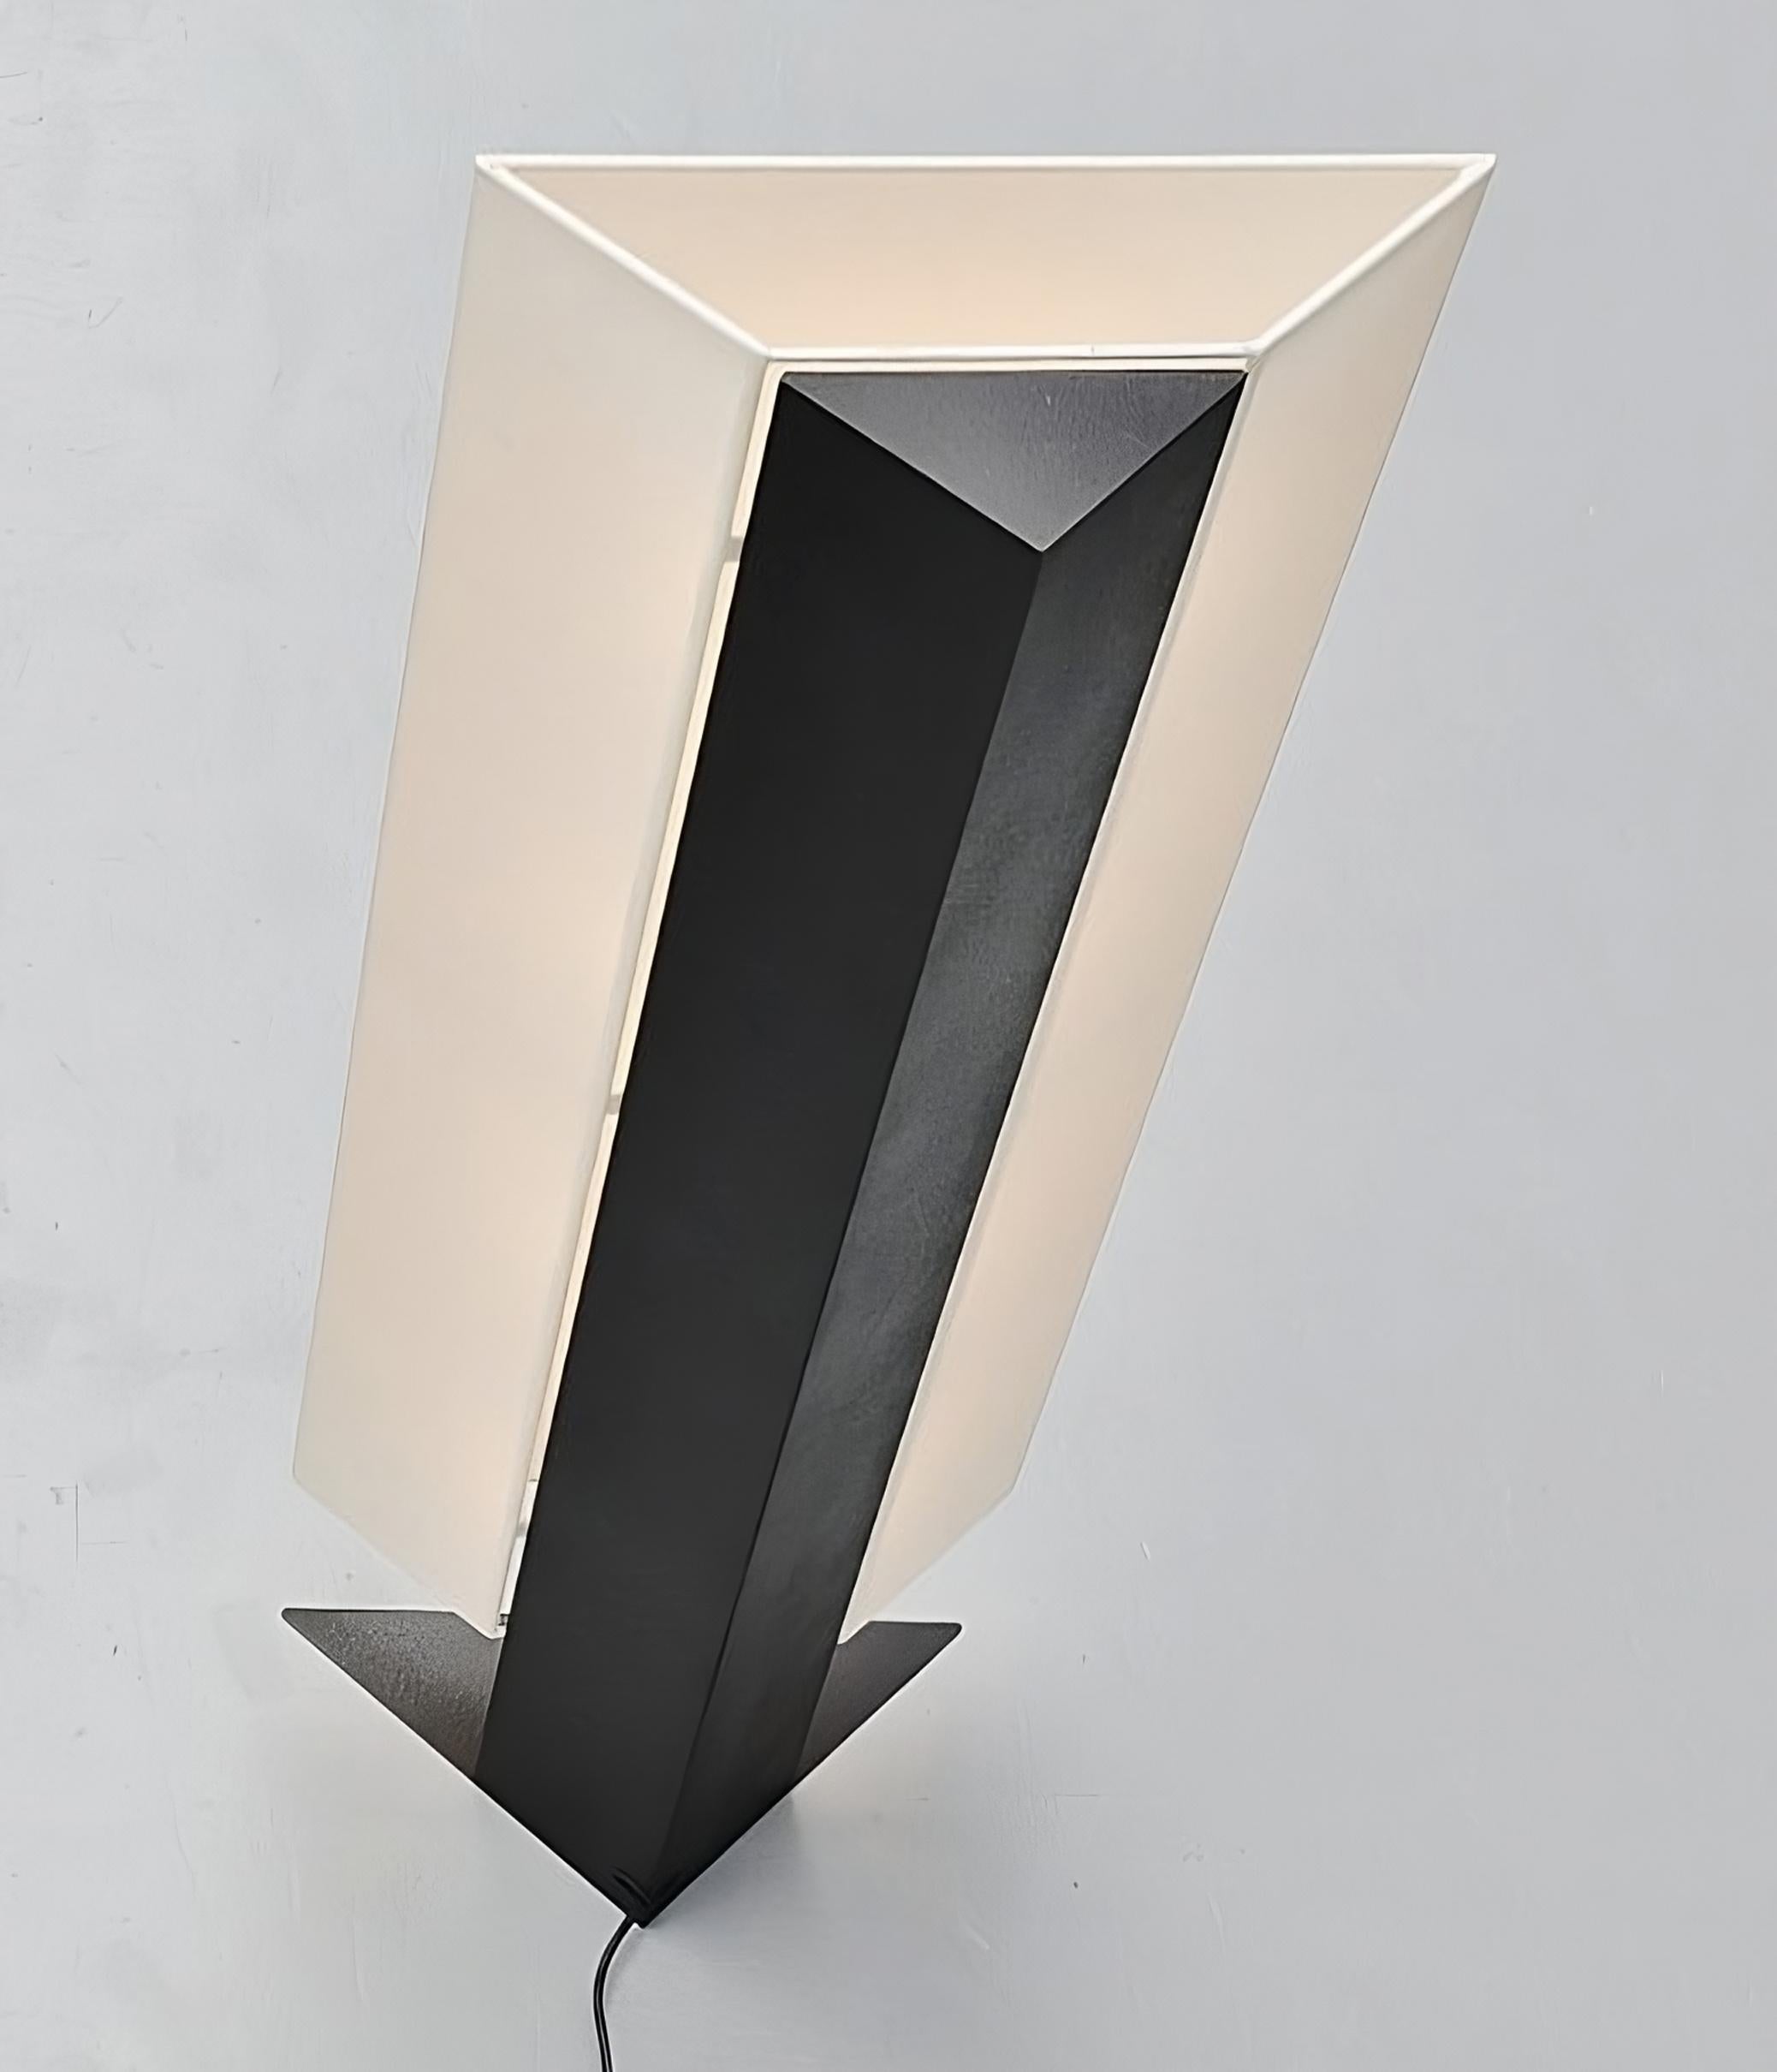 Powder-Coated Accademia Floor Lamp by Cini Boeri for Artemide 1978 For Sale